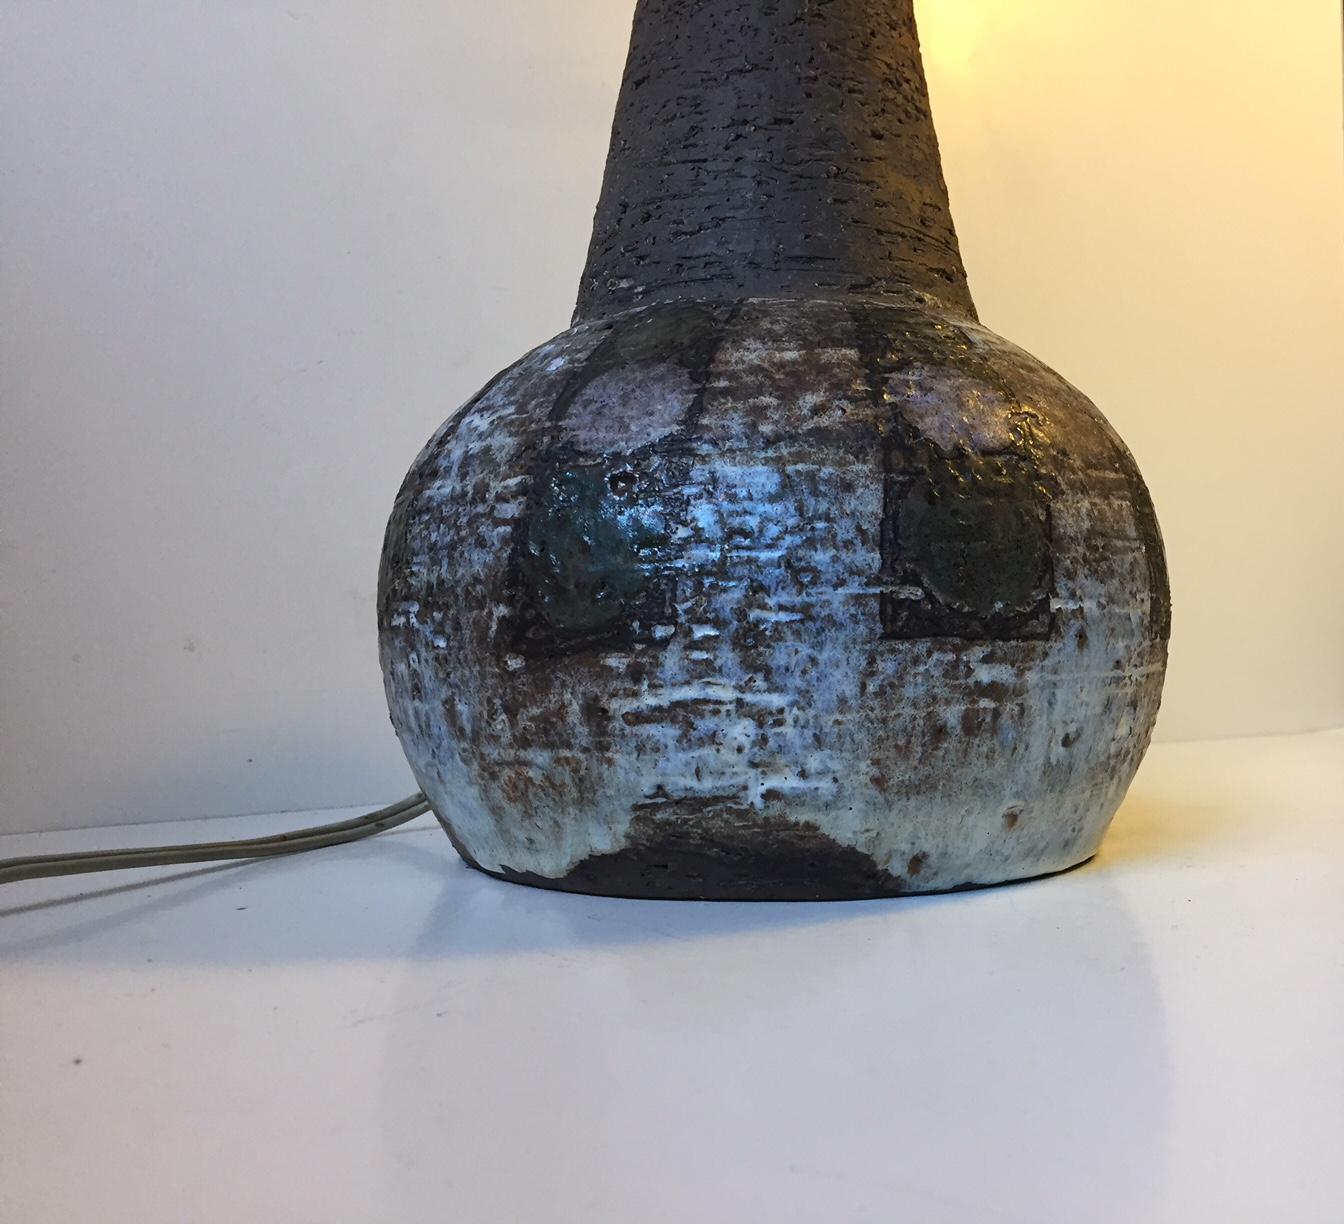 This is a unique table lamp base composed of partially glazed stoneware. The abstract motif has pink and green dots to the base. The bottom is signed: Sejer, Unik, Denmark.